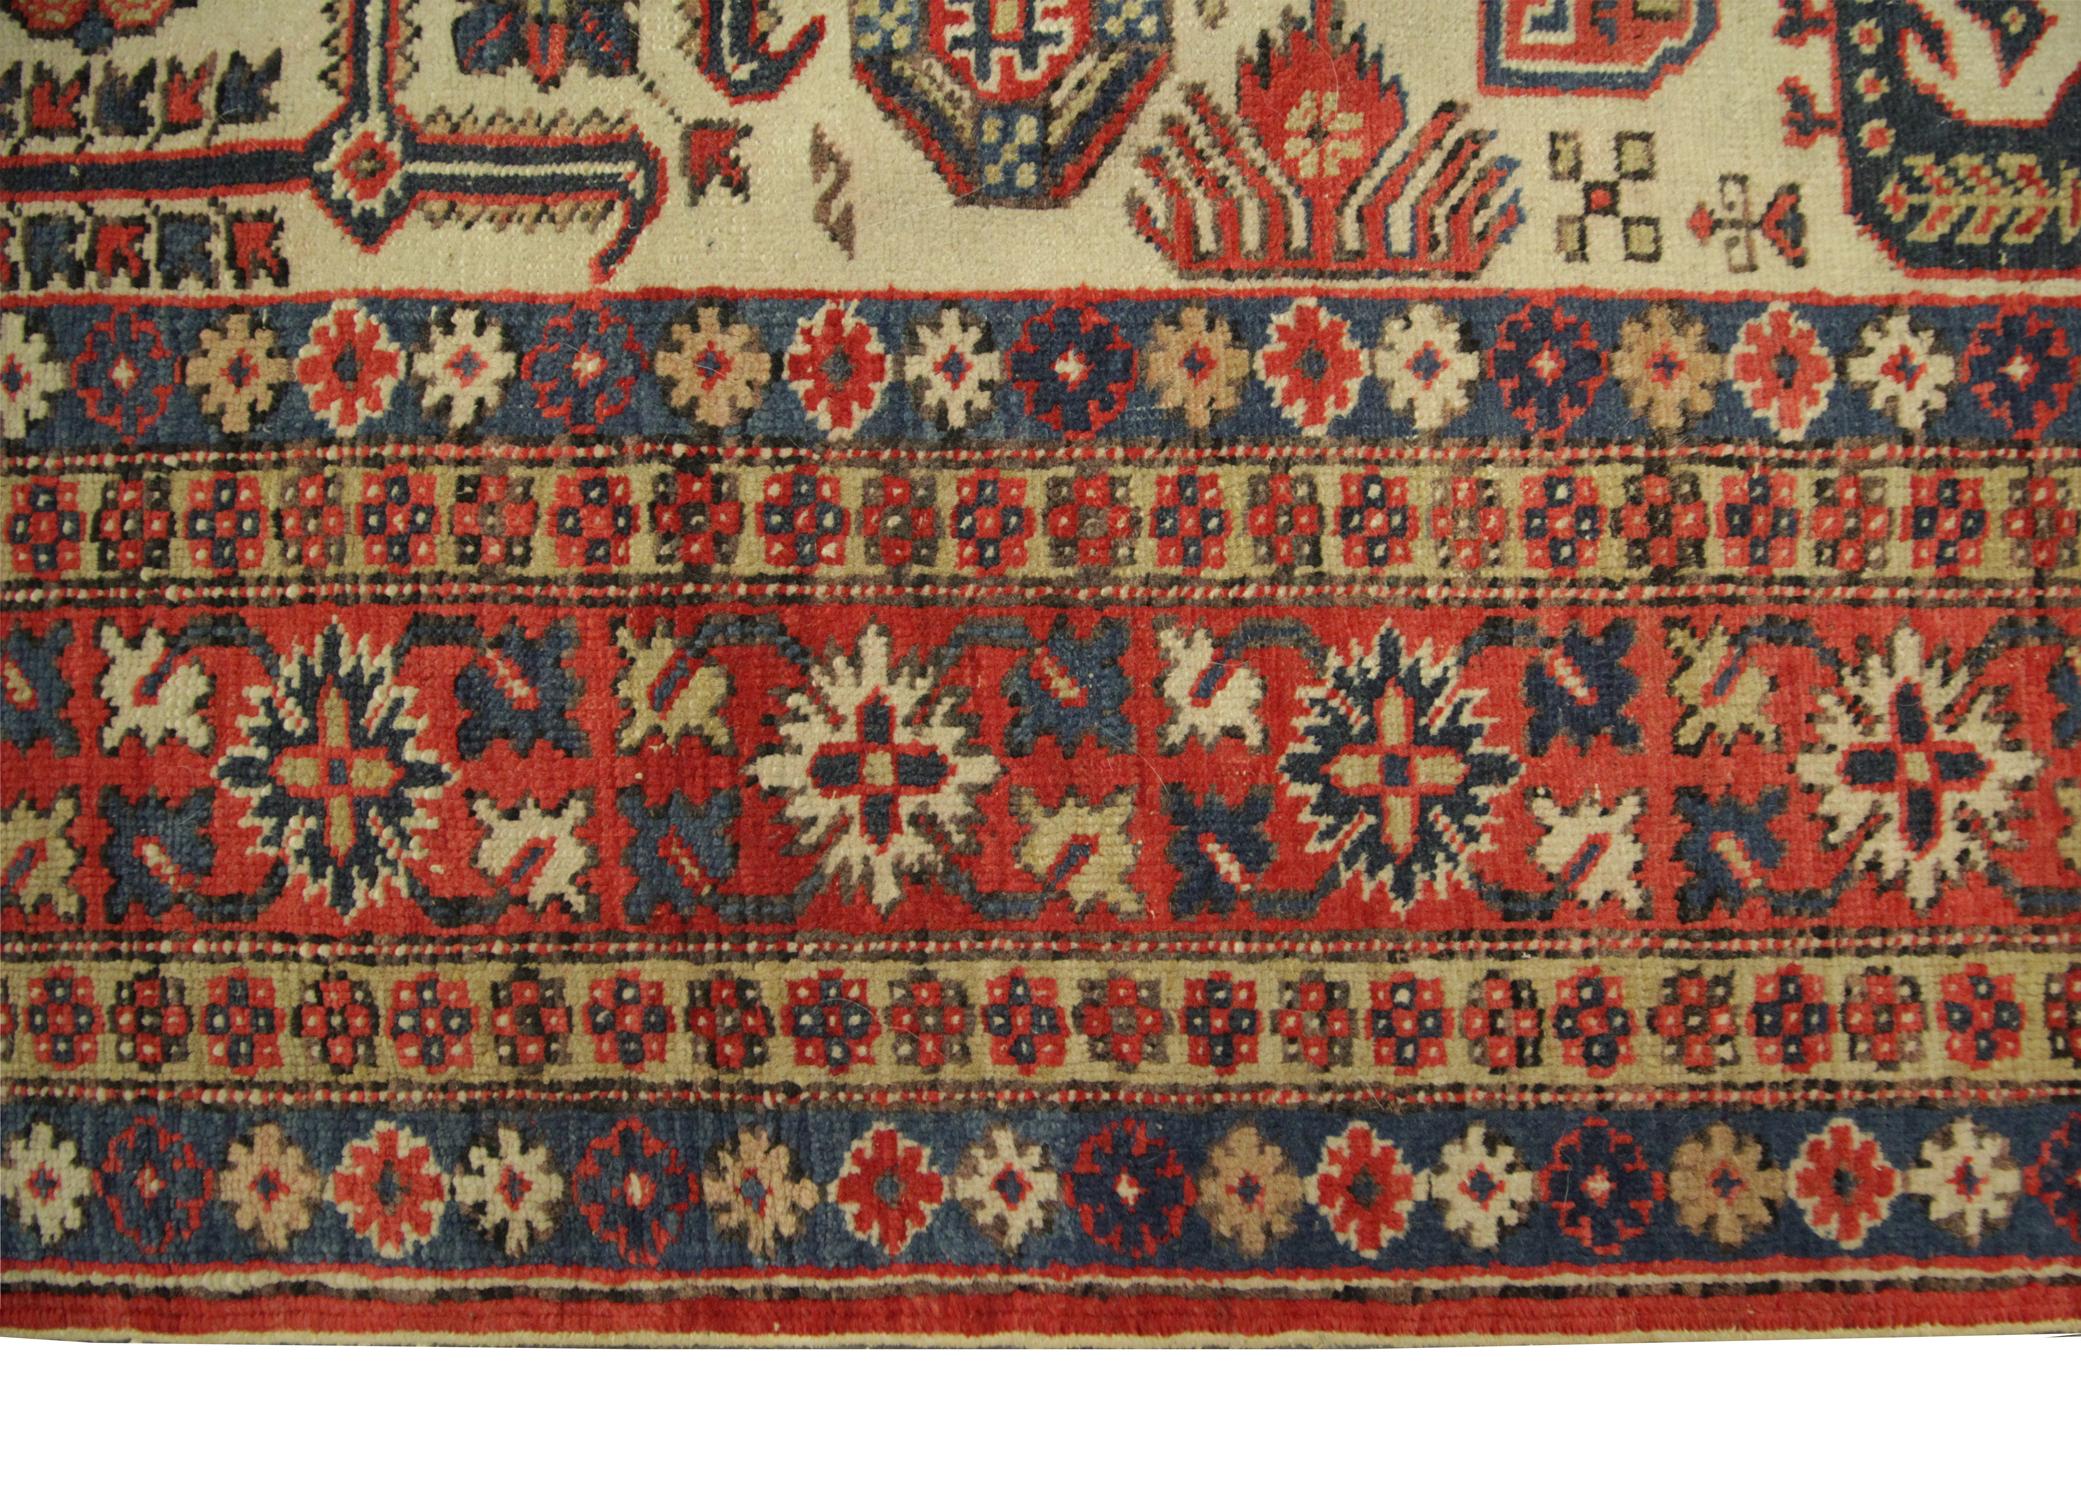 Vegetable Dyed Vintage Handmade Caucasian Carpet, Multicolored Wool Rug for Living Room For Sale